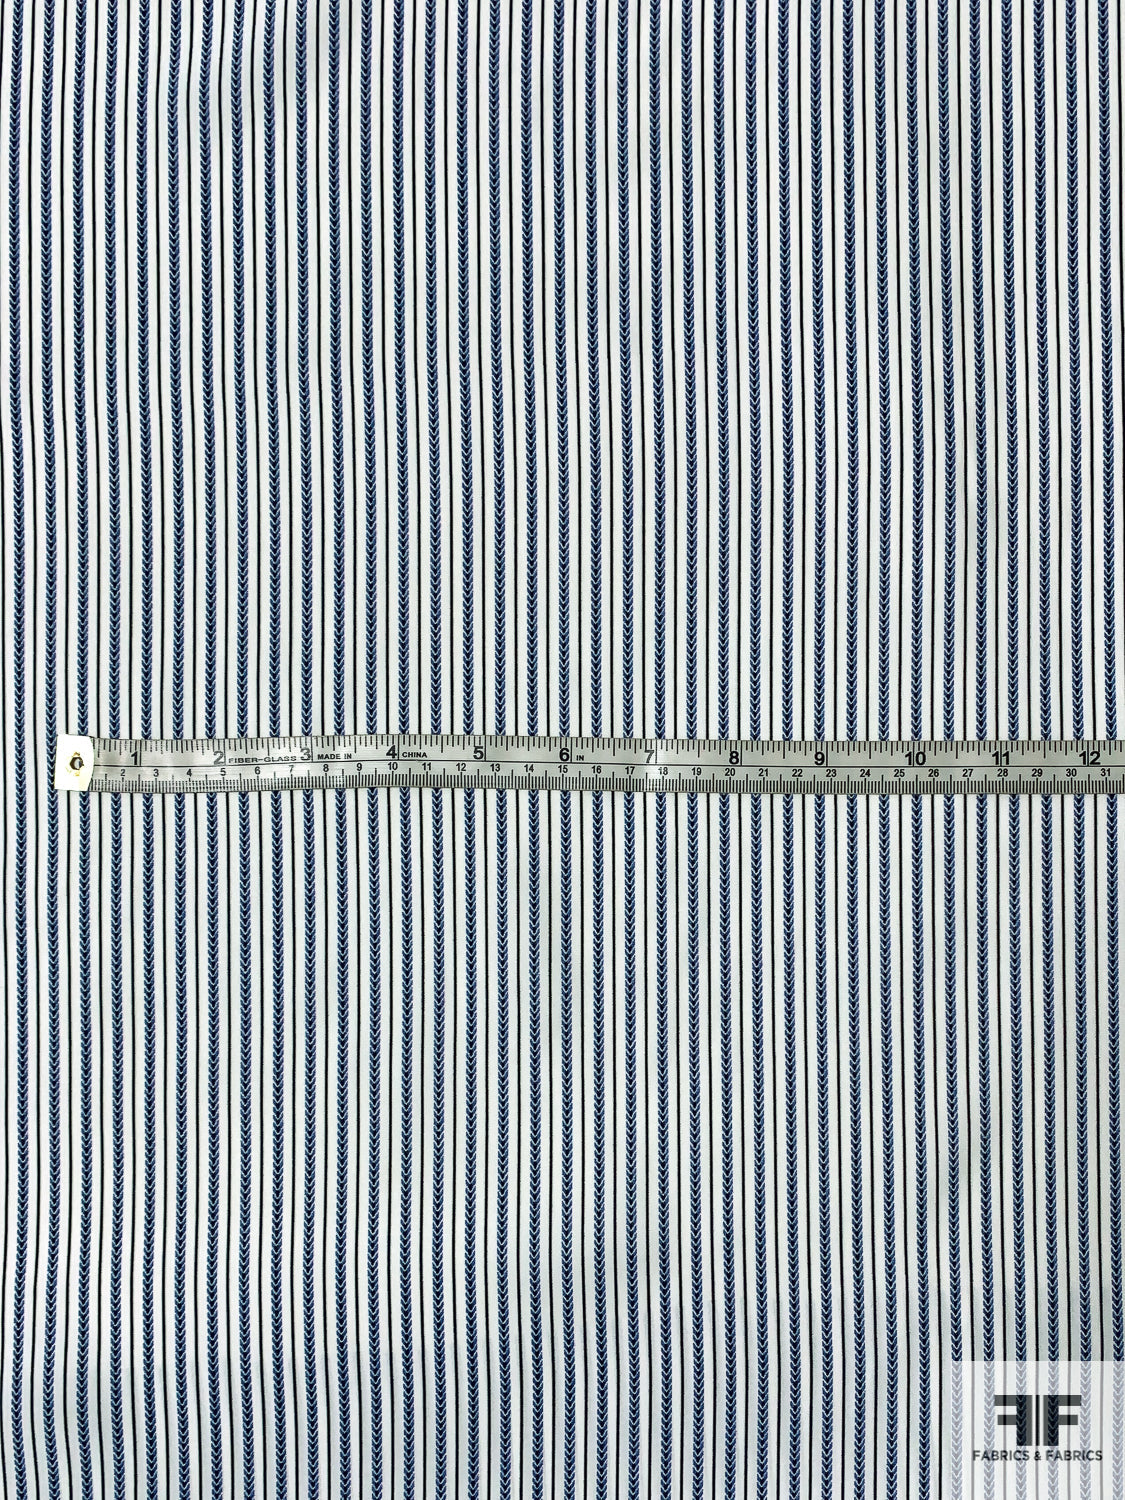 Arrow Striped Matte-Side Printed Silk Charmeuse - Periwinkle-Blue / Navy / White